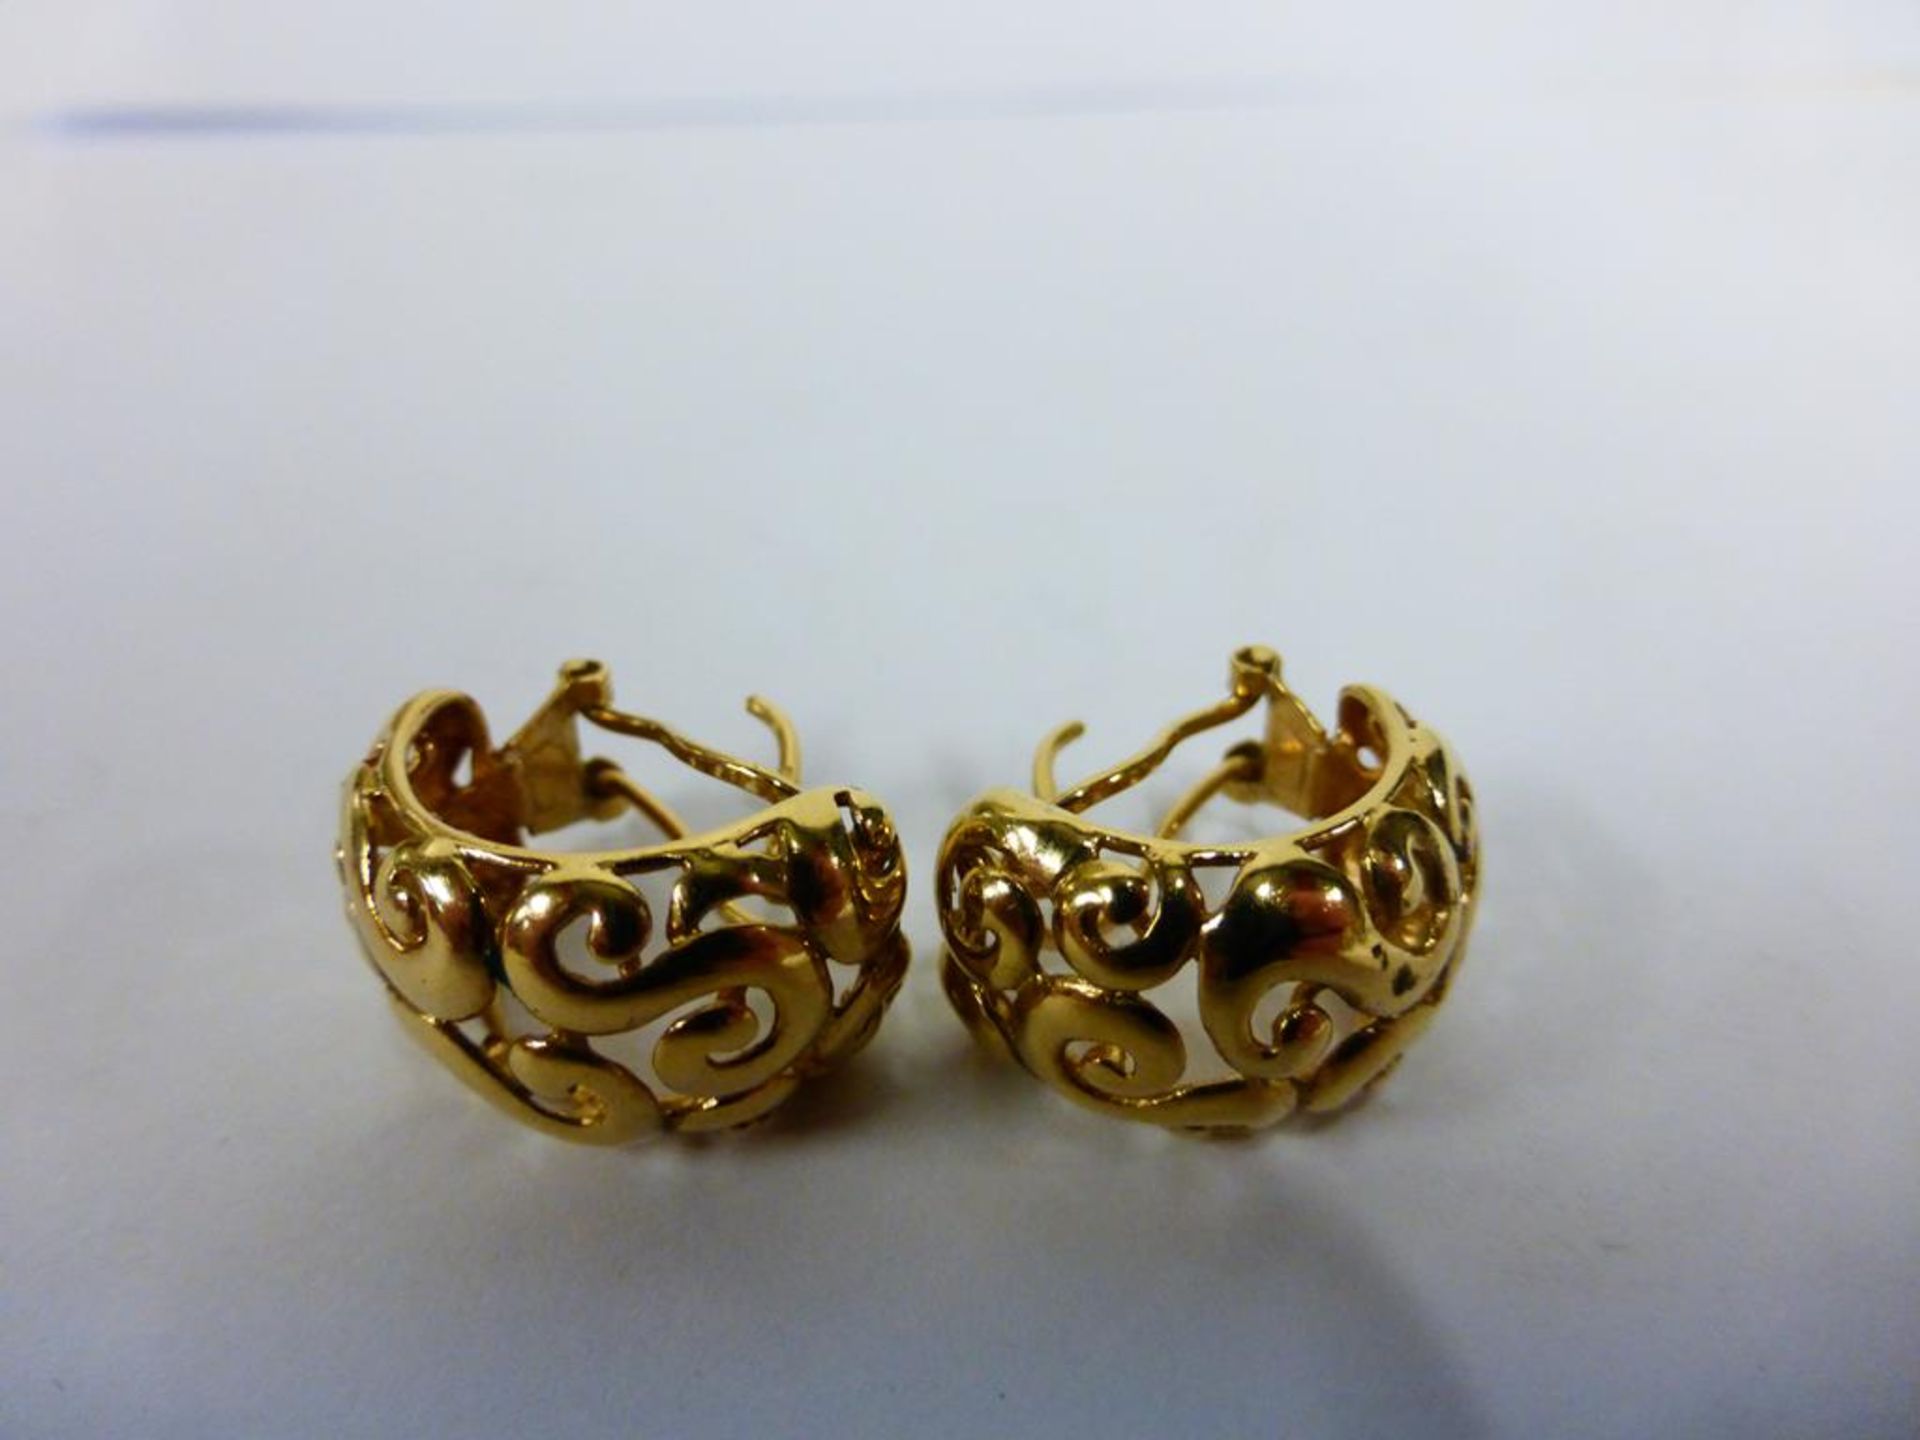 2 x Pair of 9ct Gold Earrings - Image 2 of 4